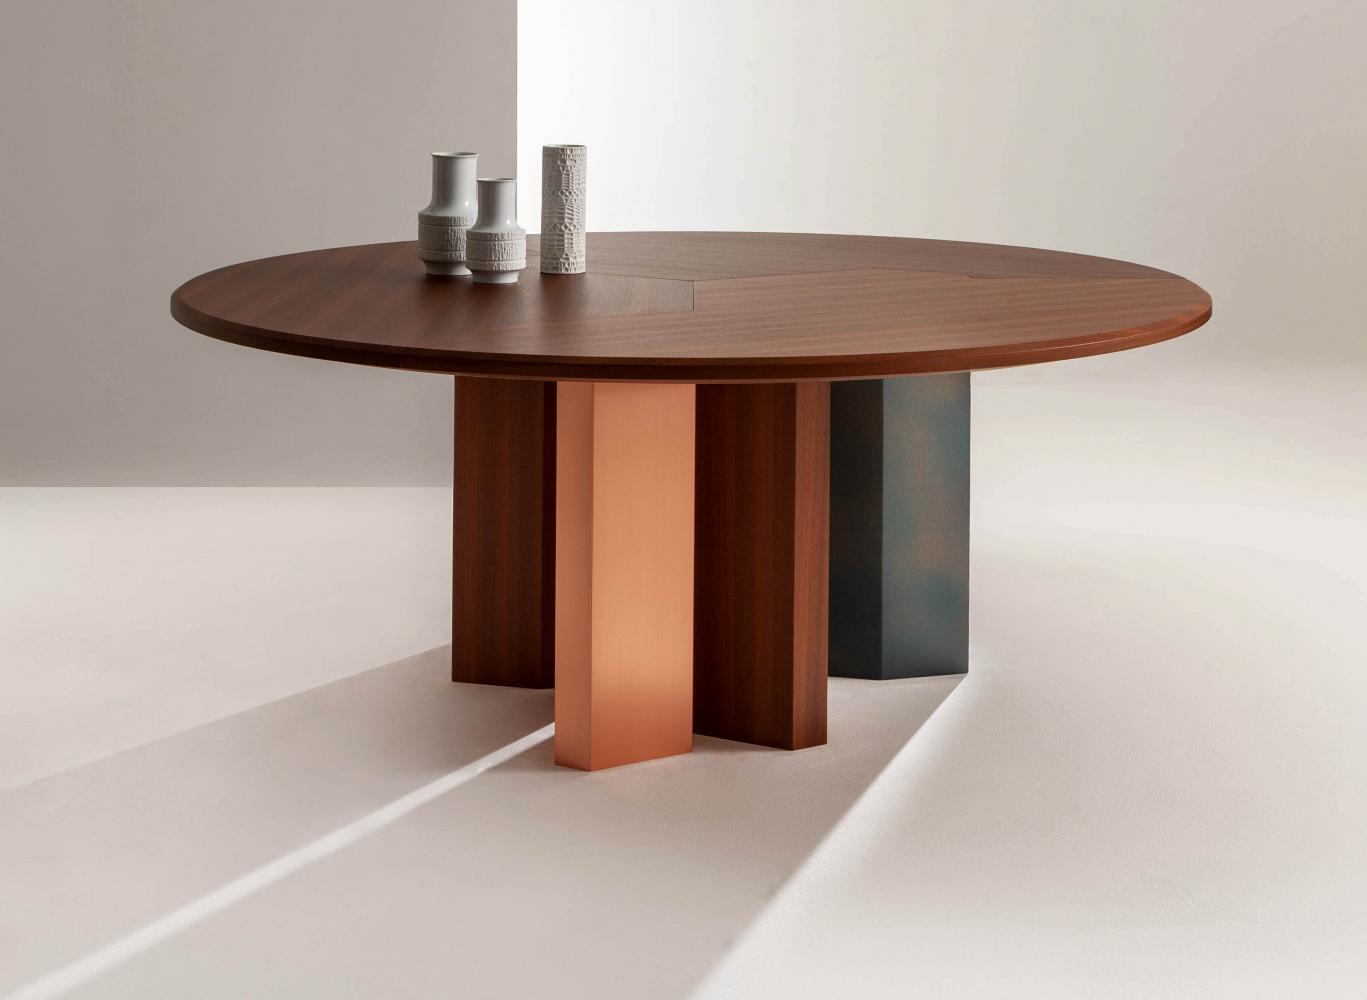 lauramerori made to measure design table in wood and copper